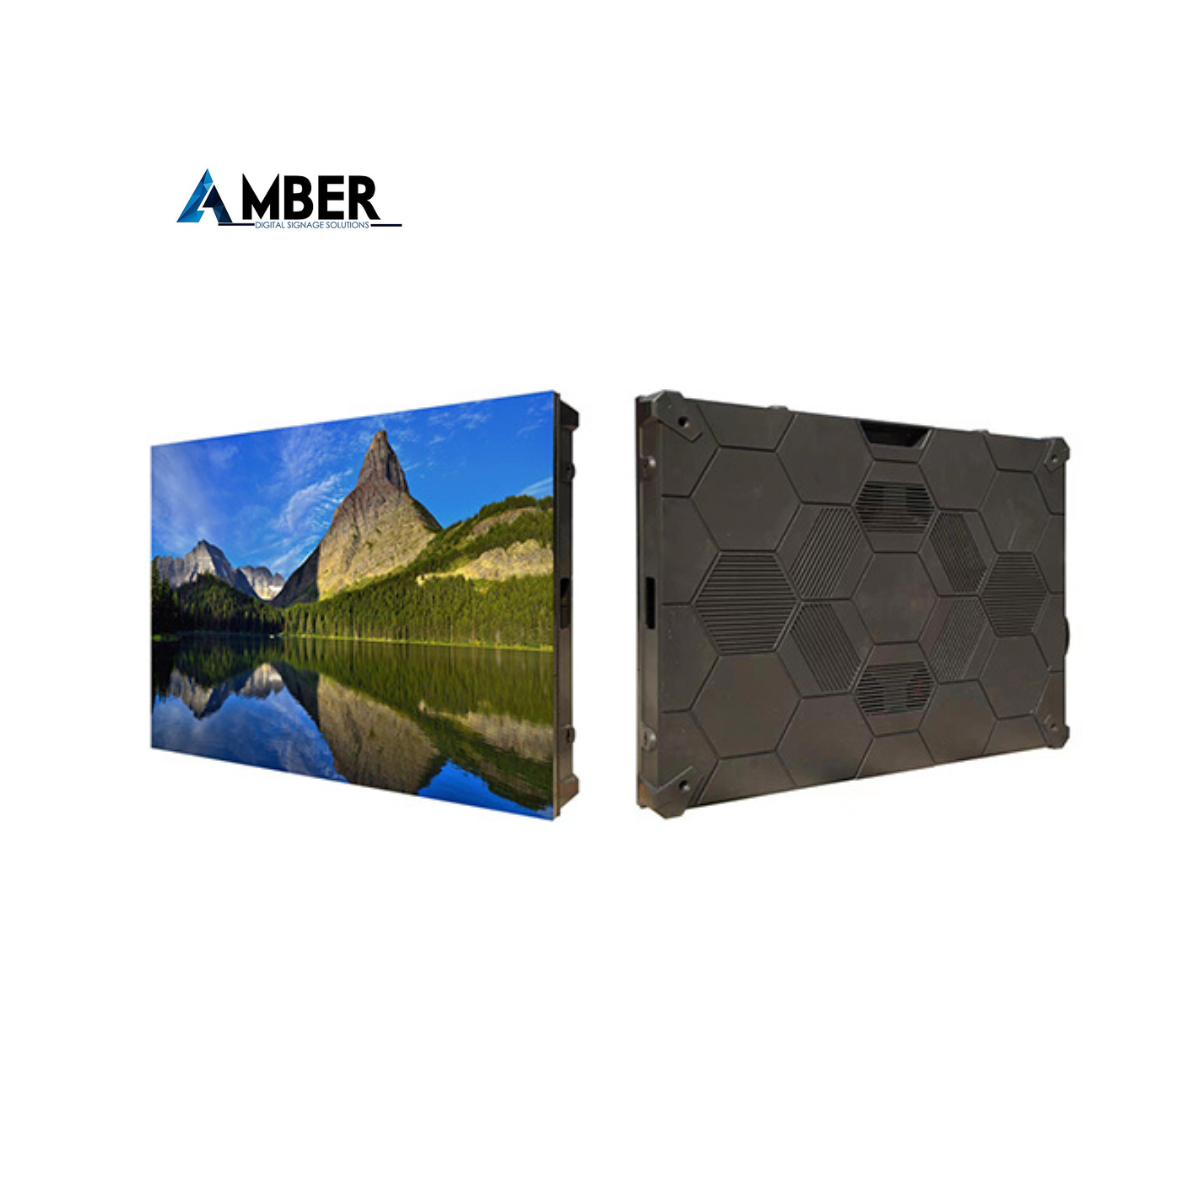 Amber BV-UHD-G Indoor LED Wall Fixed Install Series